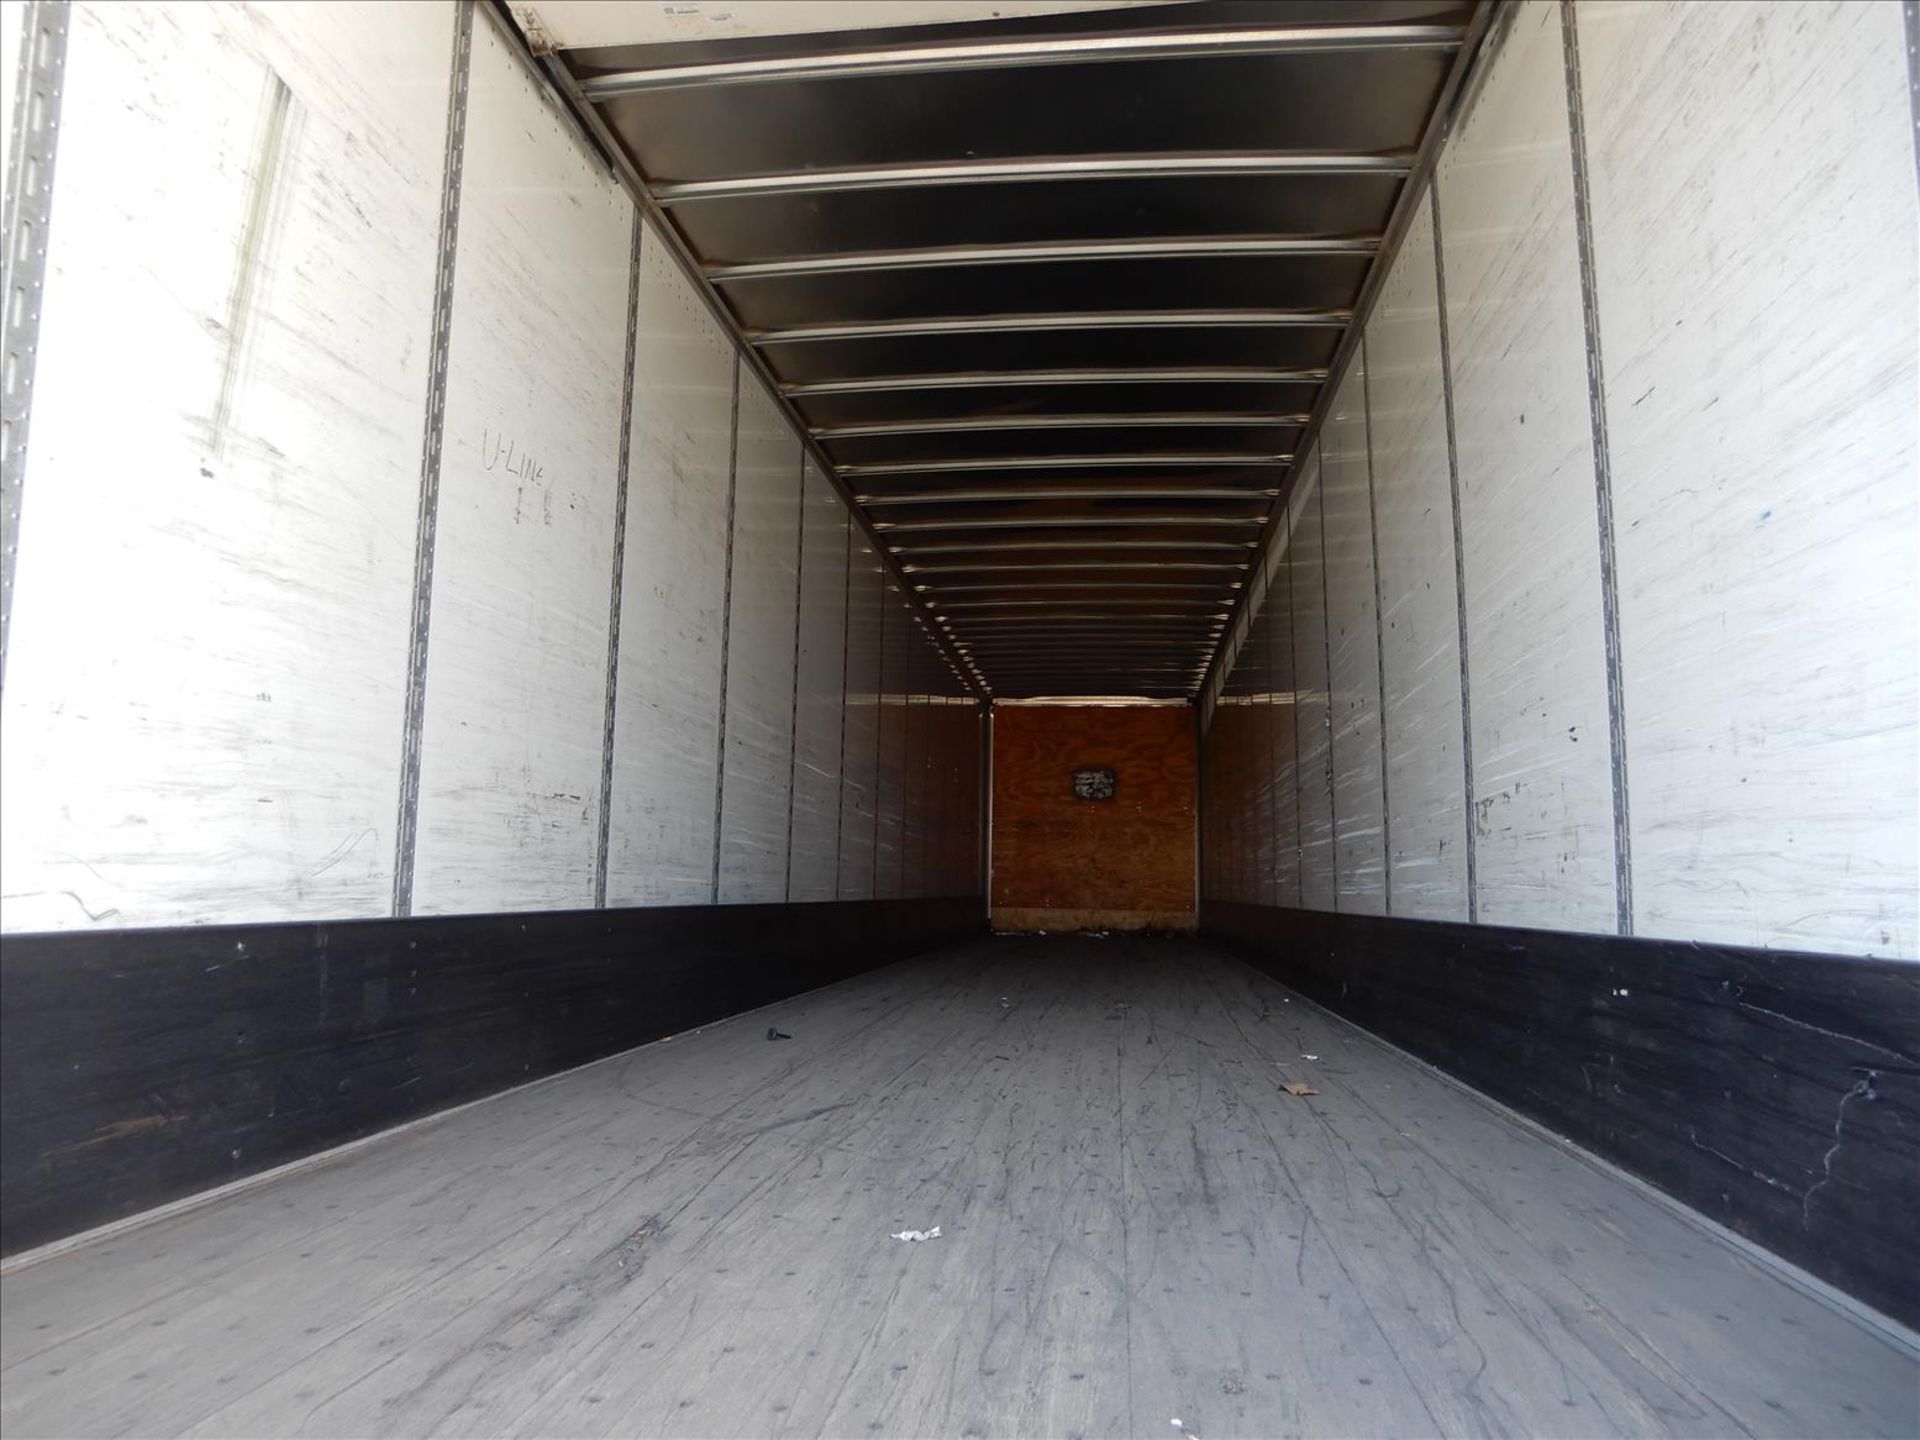 2012 Vanguard Trailer - Located in Indianapolis, IN - Image 19 of 29